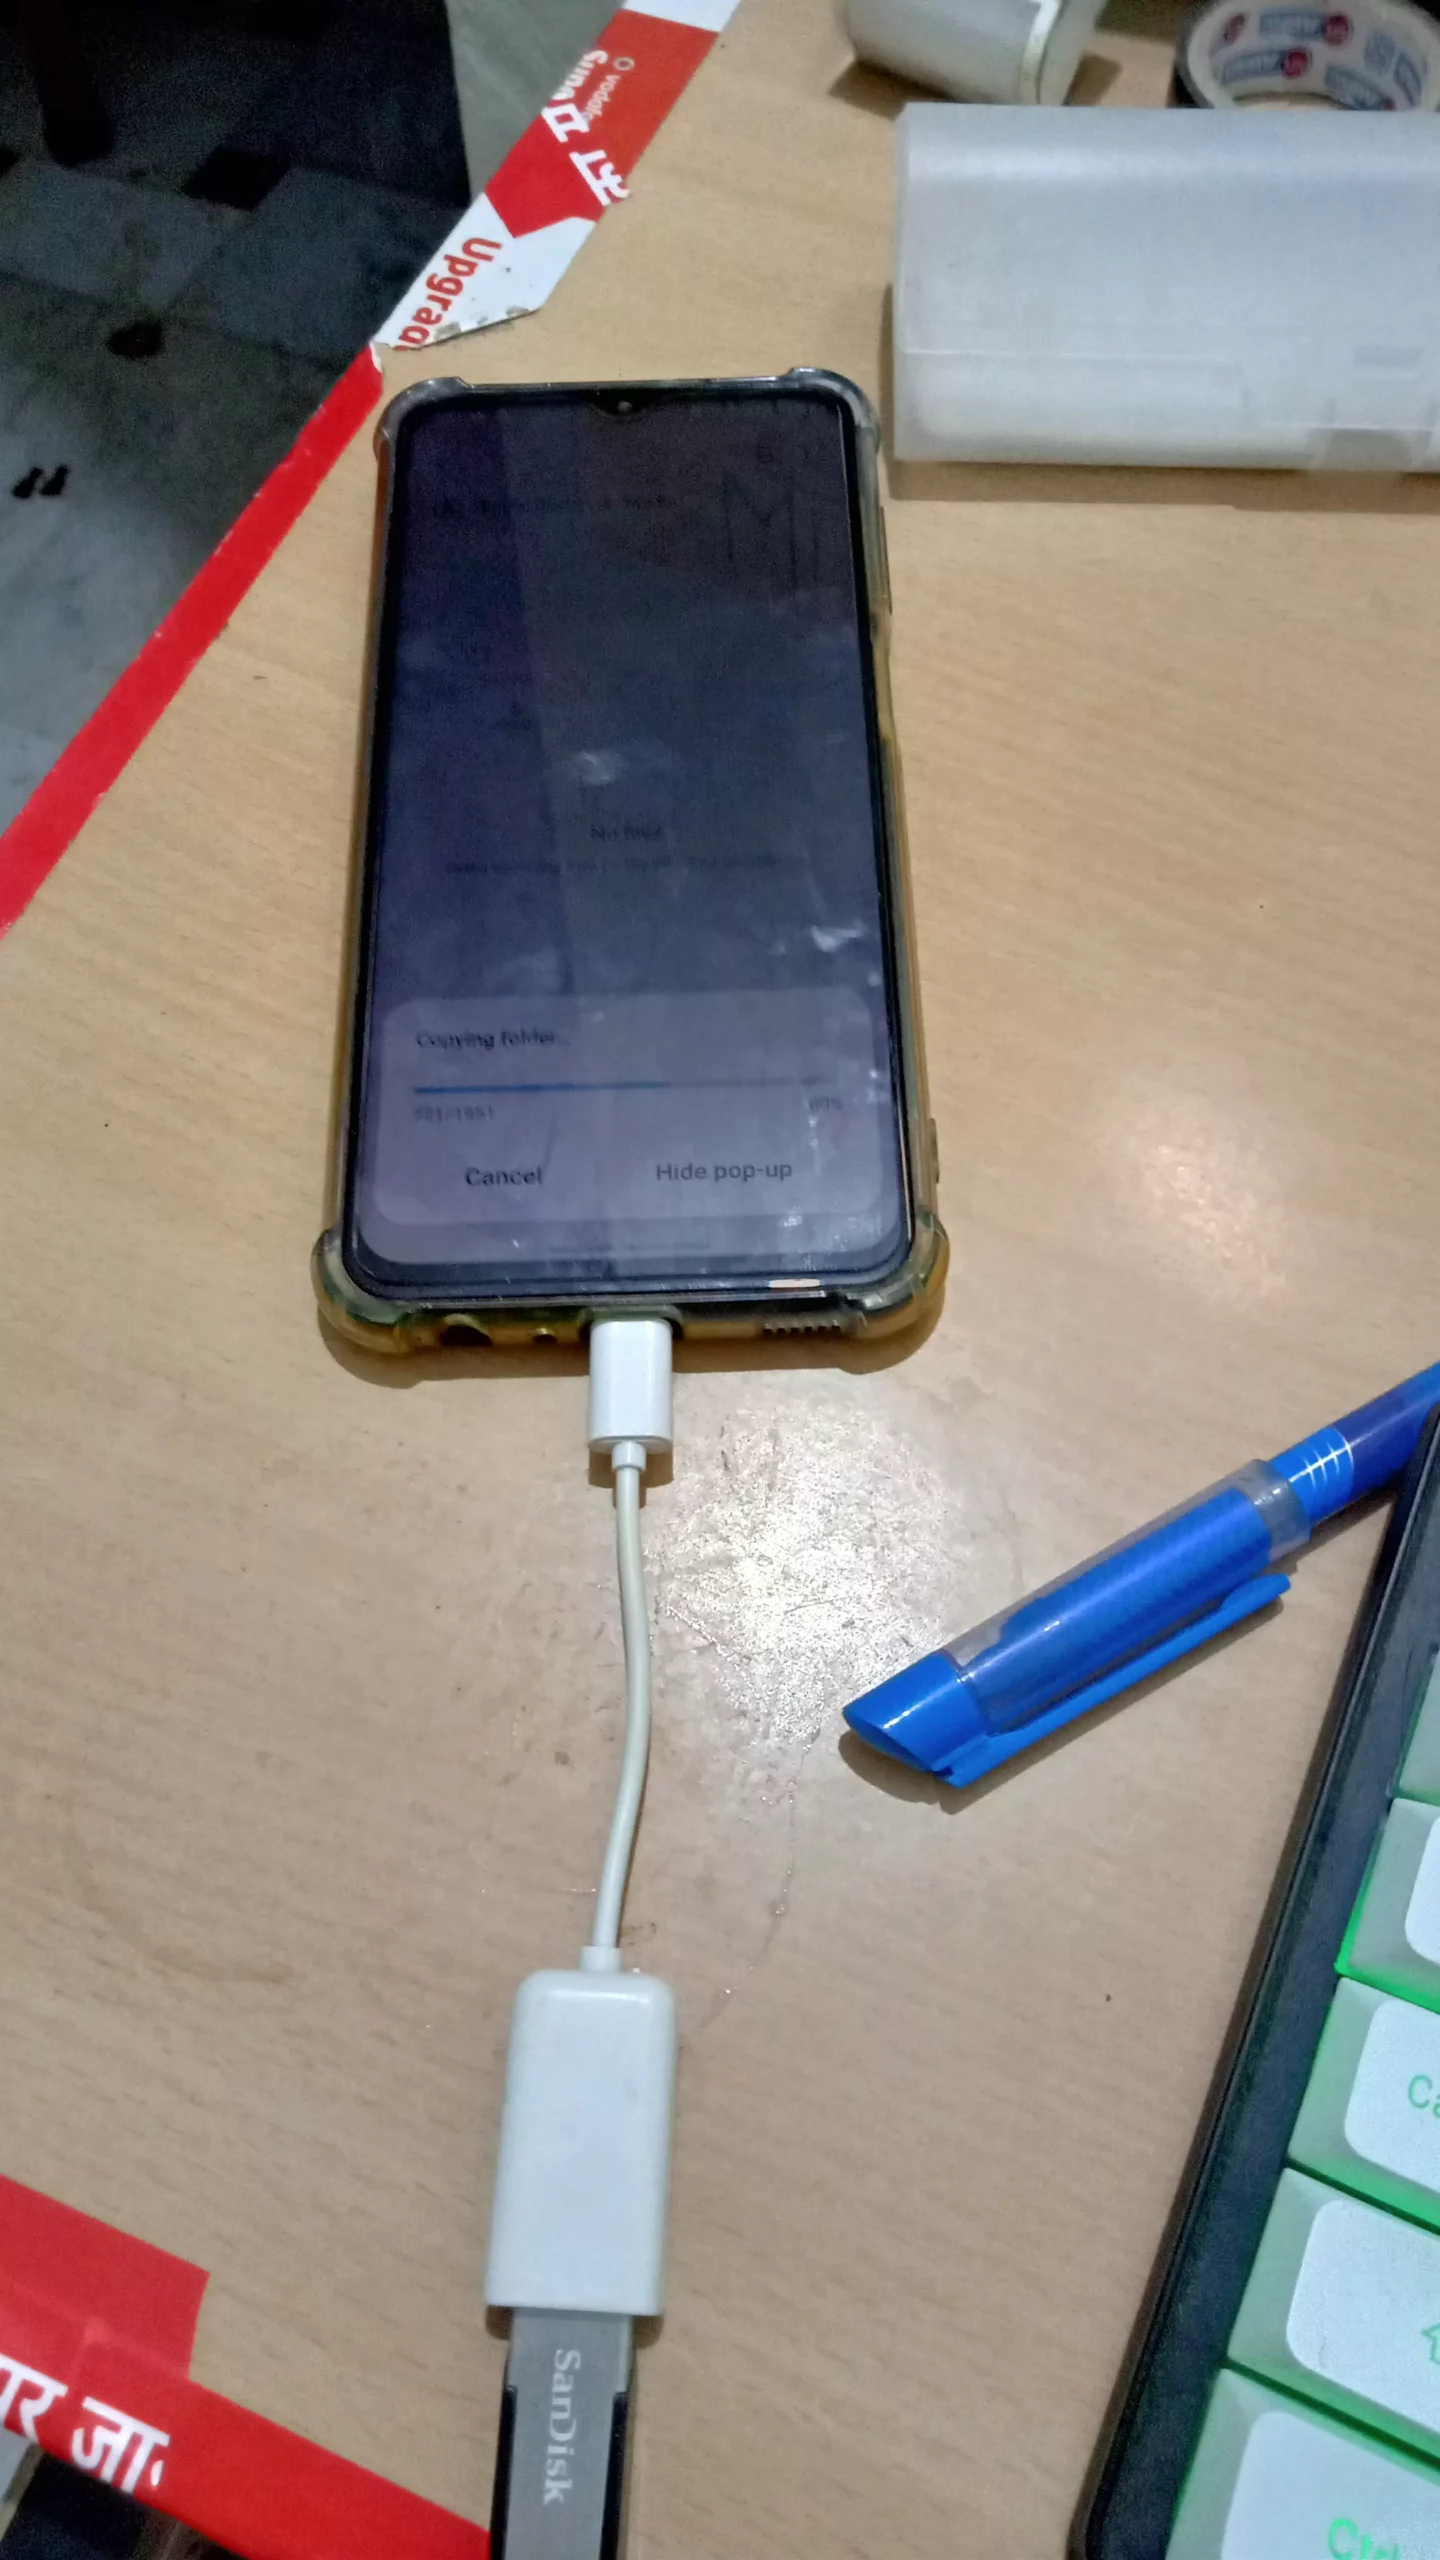 otg connected to my samsung with moving files from phone to pendrive